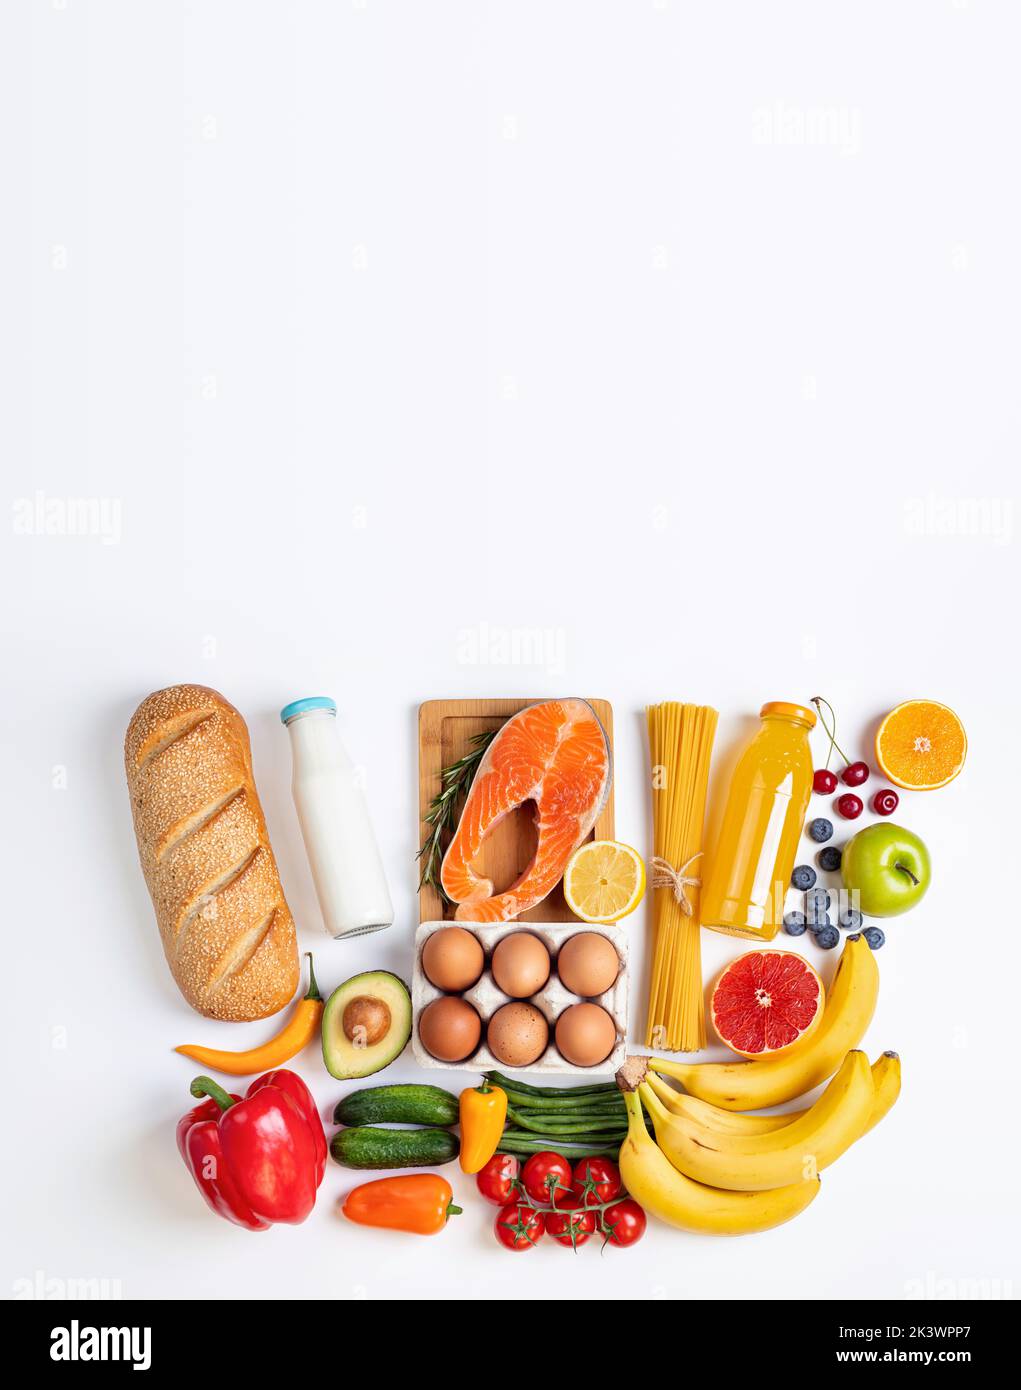 Healthy food background. Healthy food in shape of shopping basket - fish, pasta, vegetables and fruits on white table. Shopping food supermarket conce Stock Photo